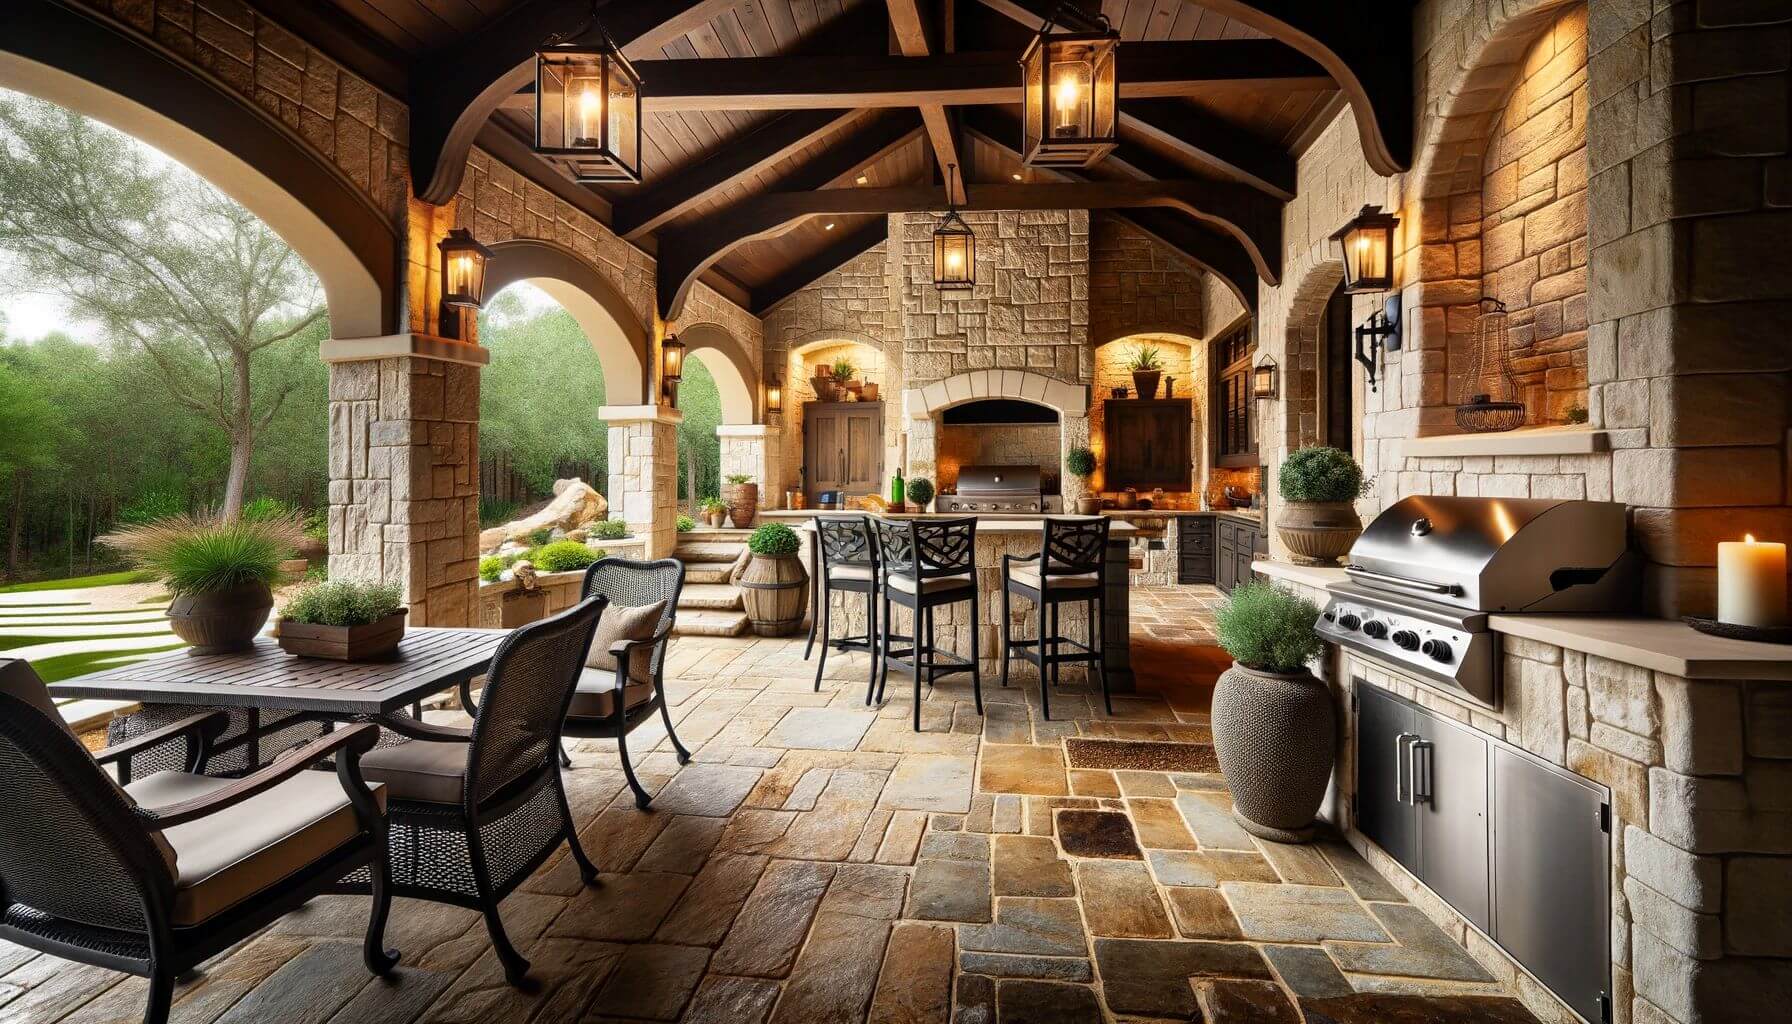 Covered Patio and Outdoor Kitchen with Stone Details